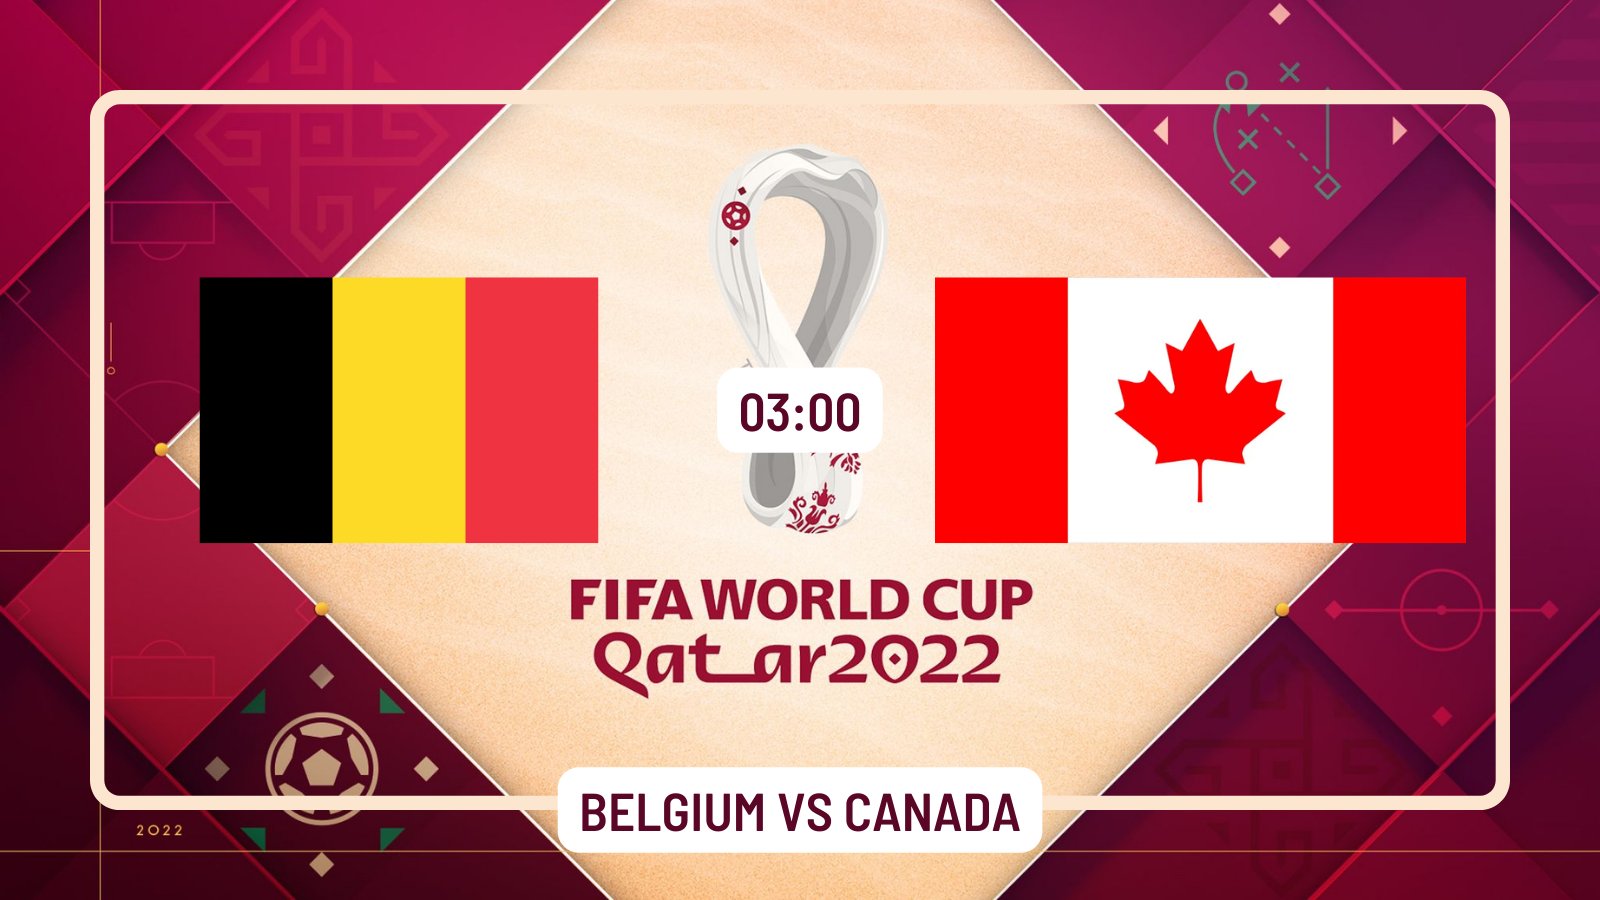 FIFA World Cup 2022: How To Watch Belgium vs Canada Live Stream Free